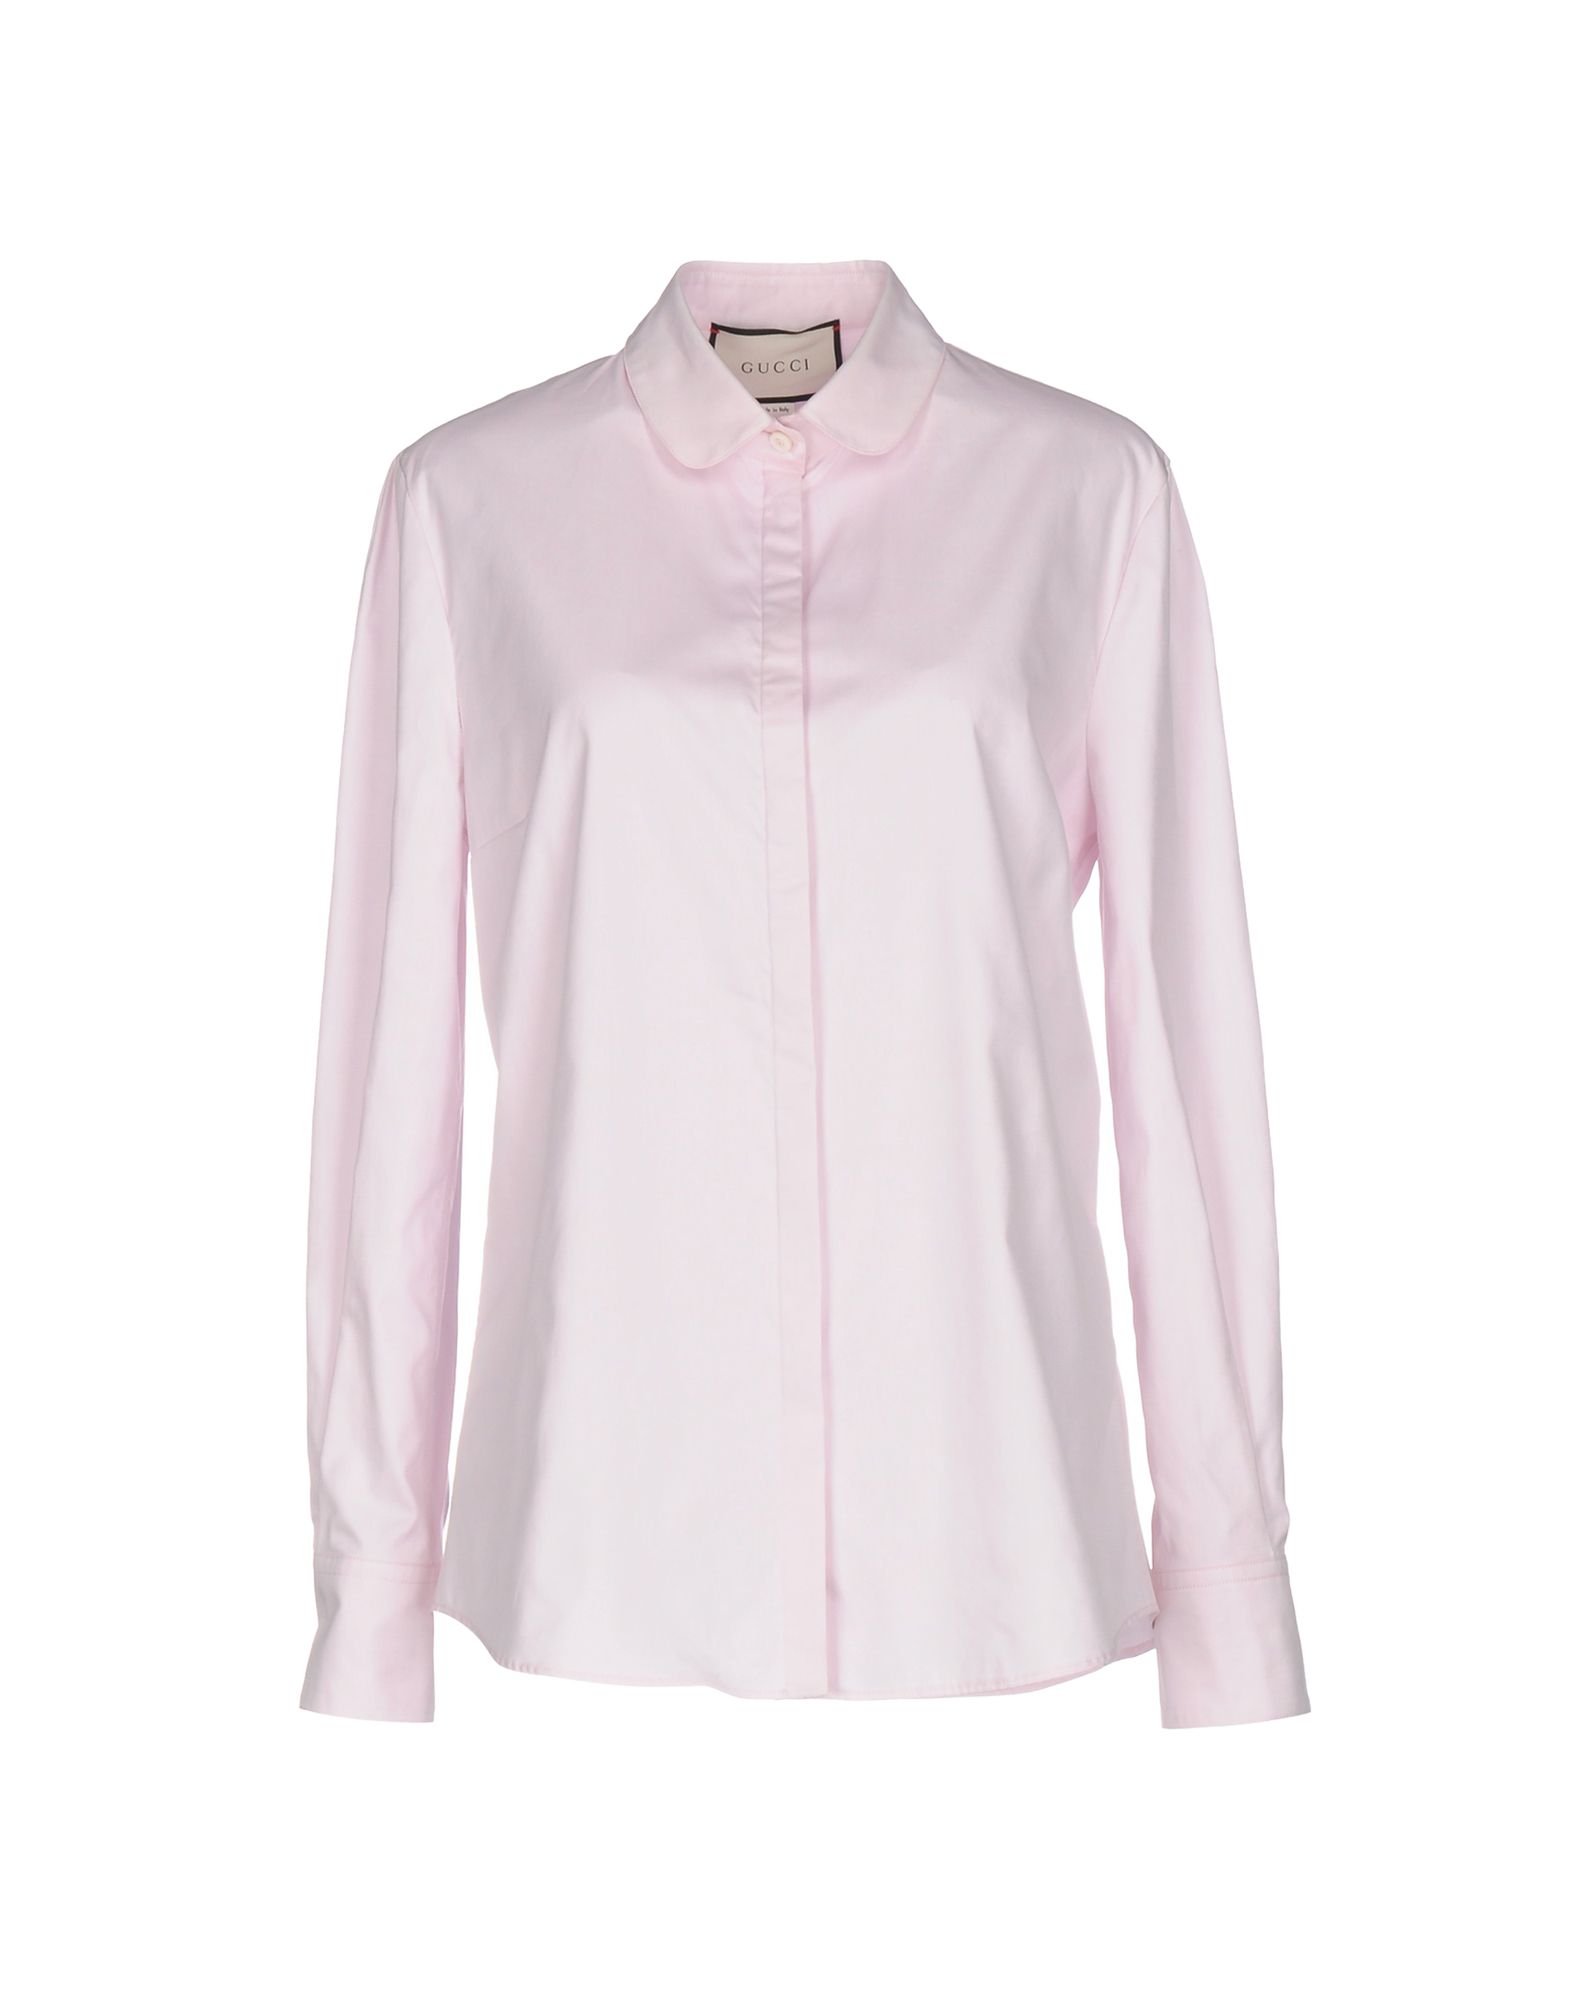 GUCCI Solid color shirts & blouses,38645798FC 4